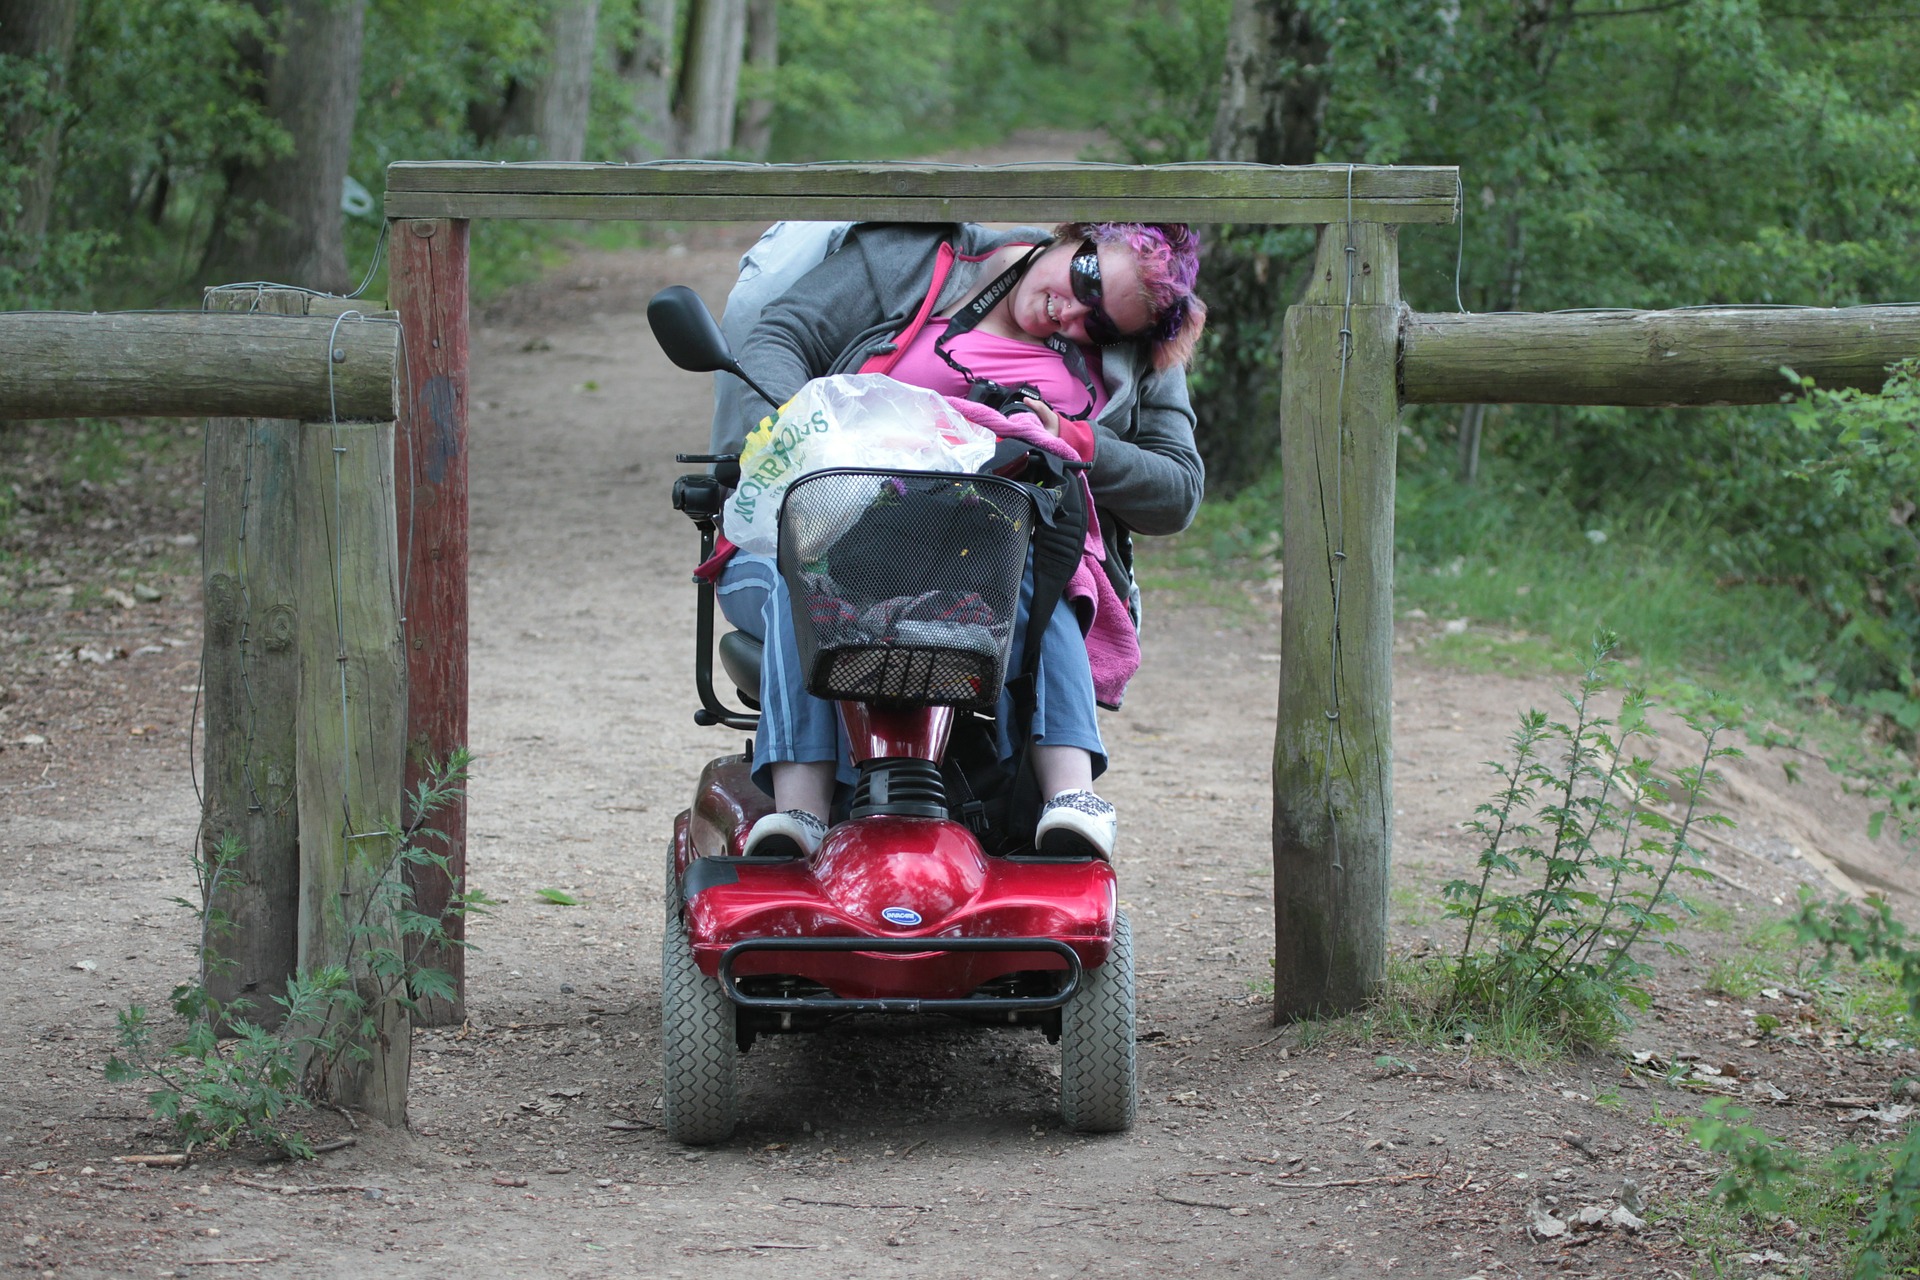 Photo of a person using a mobility scooter on a country path. The person is having to bend over because there is a wooden bar across the path.